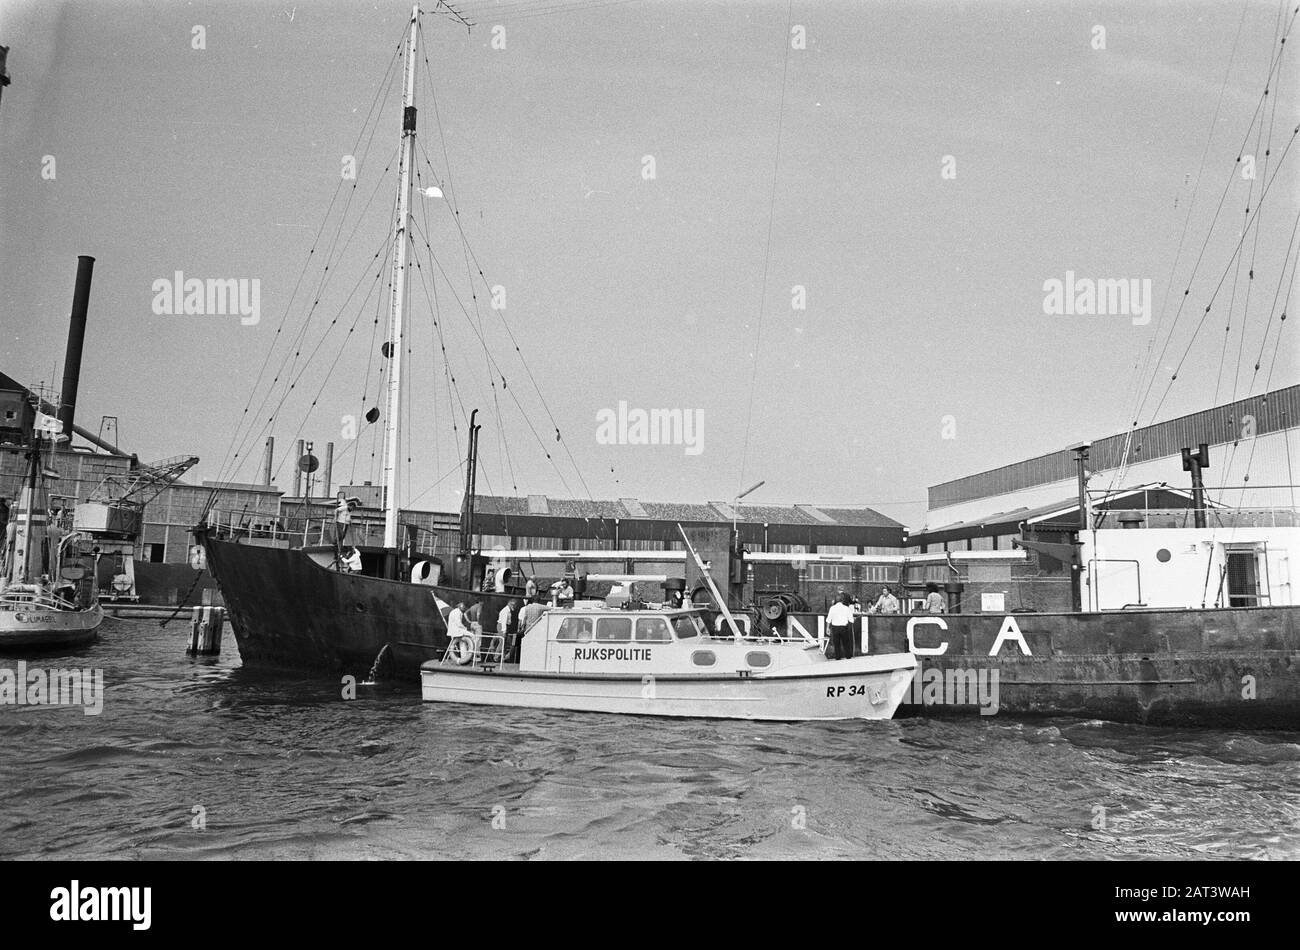 The seizure of Radio Veronica's ship in the port of Amsterdam From a police  boat, the national police enters the ship of Veronica Date: 11 August 1975  Location: Amsterdam, Noord-Holland Keywords: ports,